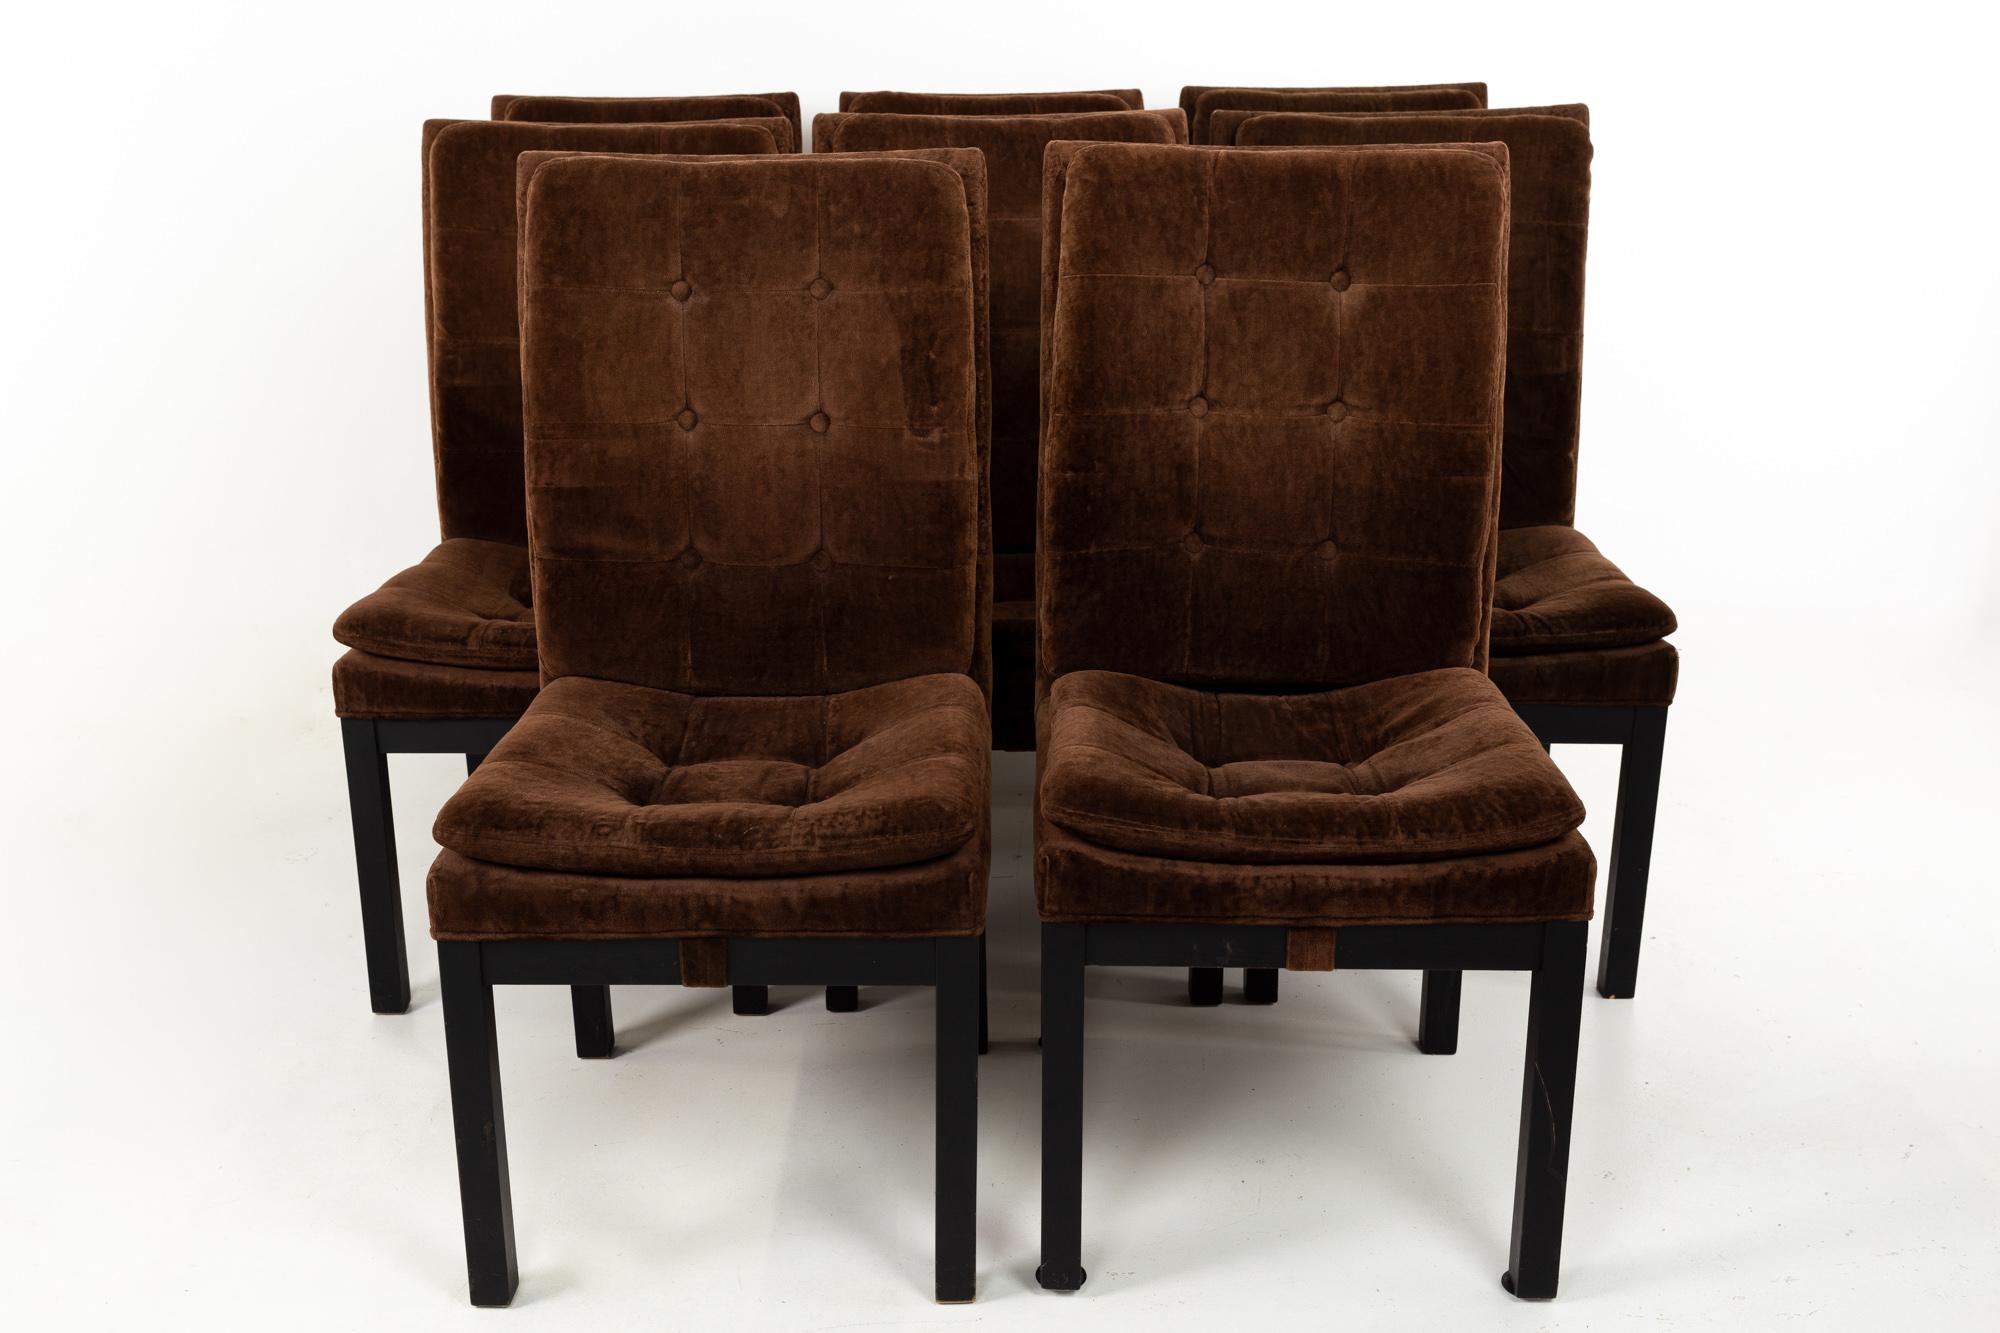 Dillingham Mid Century upholstered parsons dining chairs - Set of 8
These chairs are 20 wide x 21 deep x 40 inches high, with a set height of 19 inches

This set is available in what we call restored vintage condition. Upon purchase it is thoroughly